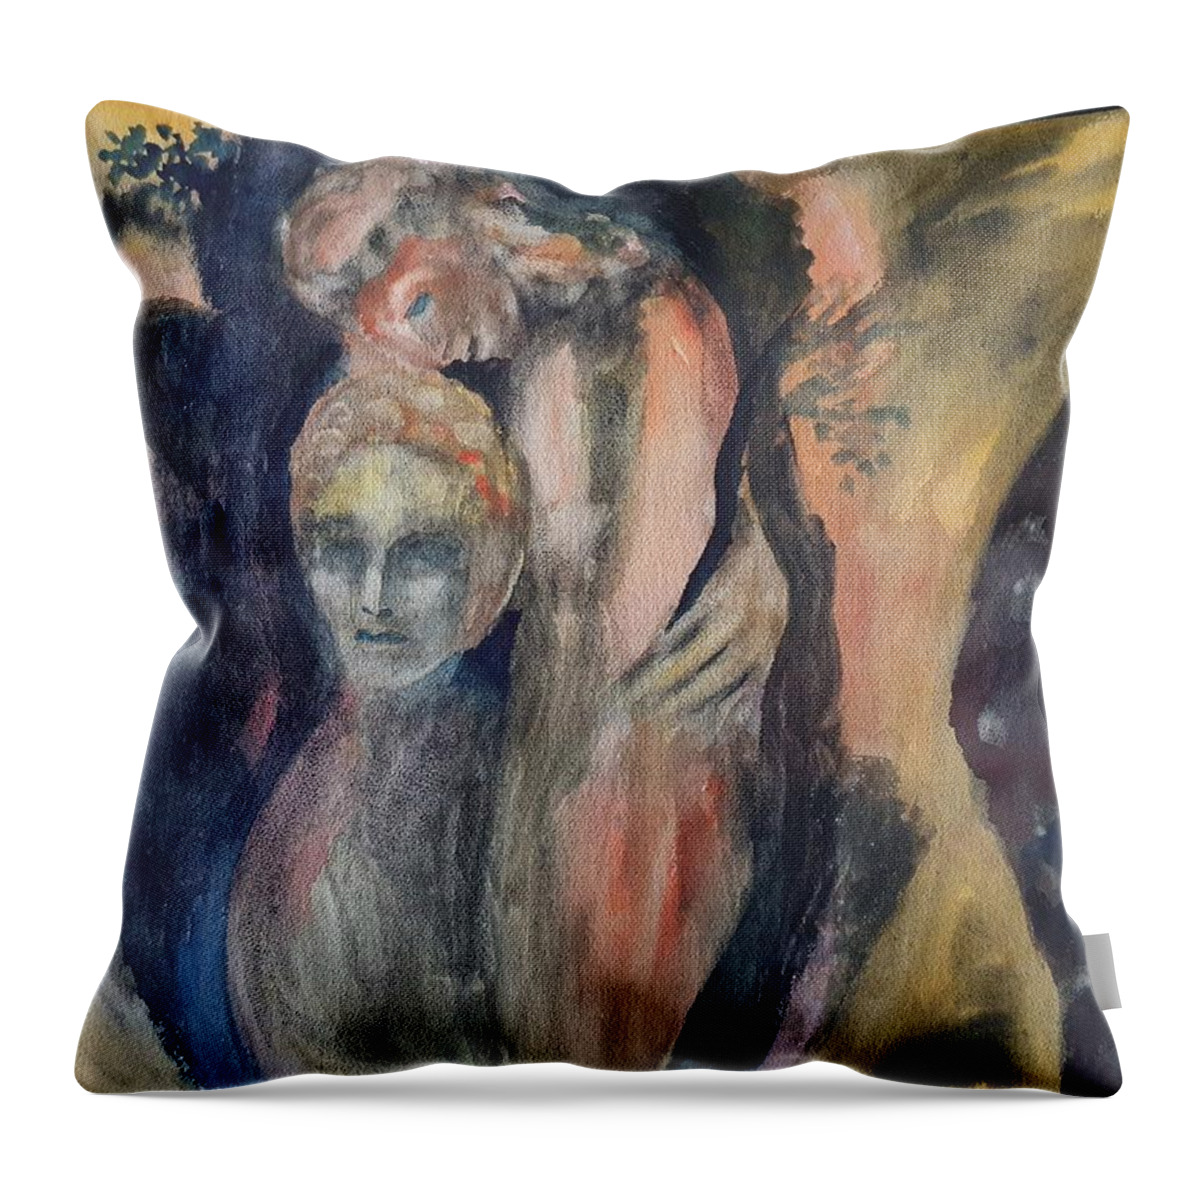 Sculpture Throw Pillow featuring the painting Spirits of the Trees by Enrico Garff